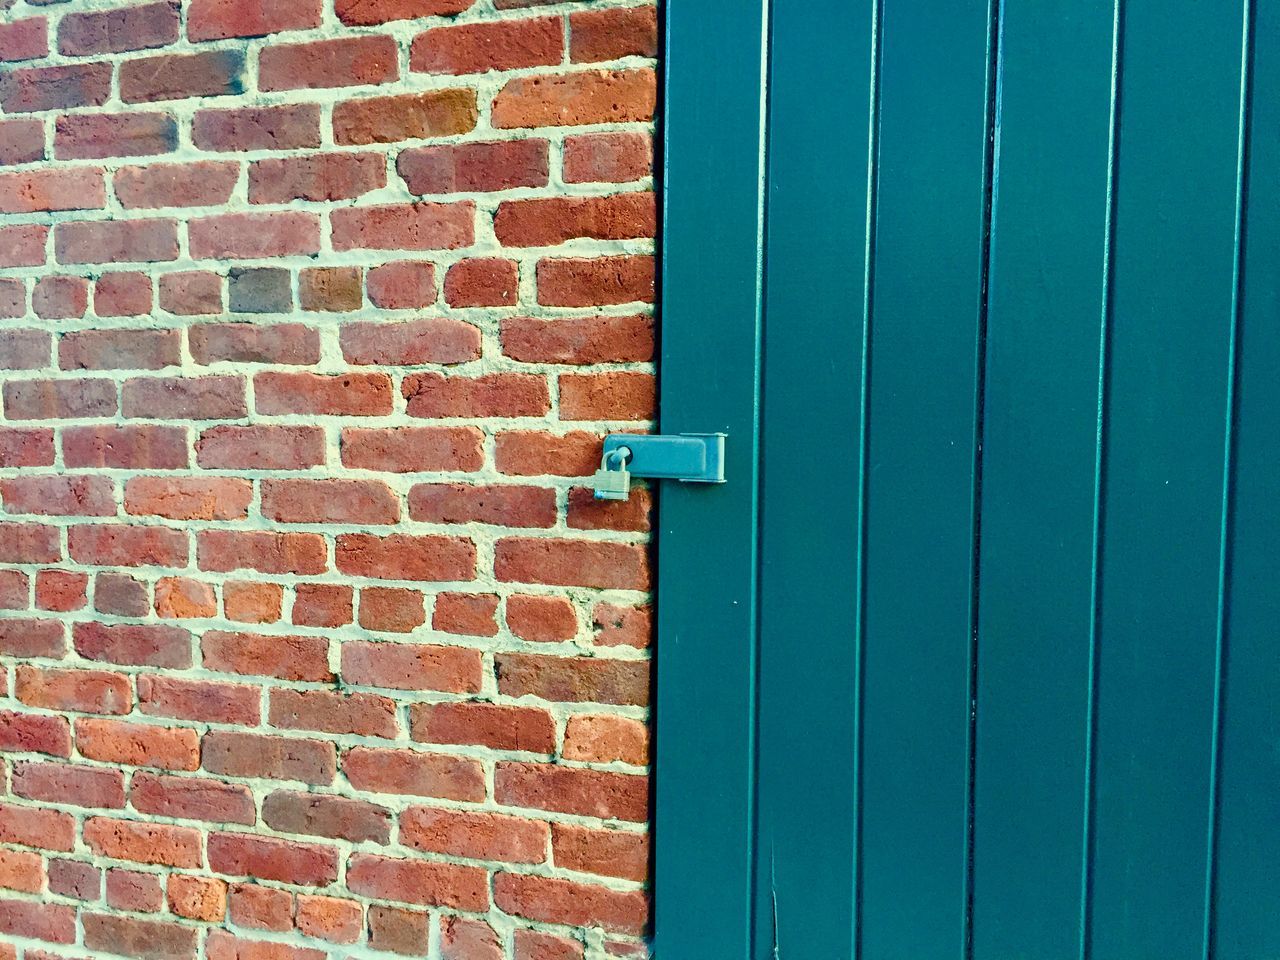 wall - building feature, built structure, architecture, building exterior, brick wall, wall, red, blue, protection, door, safety, closed, day, outdoors, no people, security, textured, pattern, low angle view, close-up